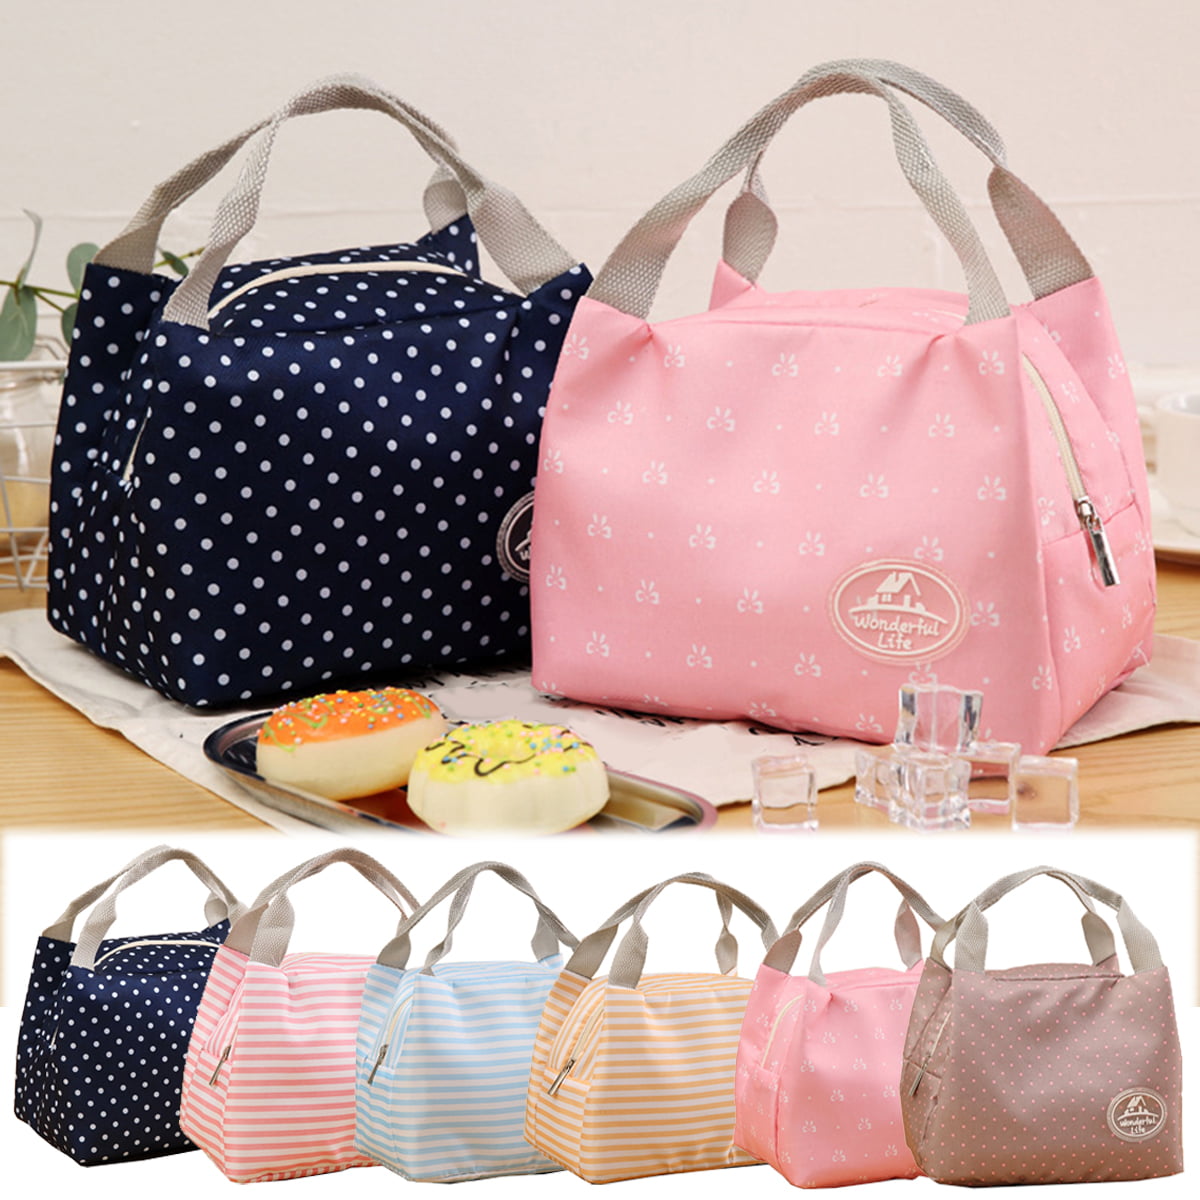 Women Kids Insulated Lunch Bag Thermal Cooler Picnic Food Box Tote Carry Bags 